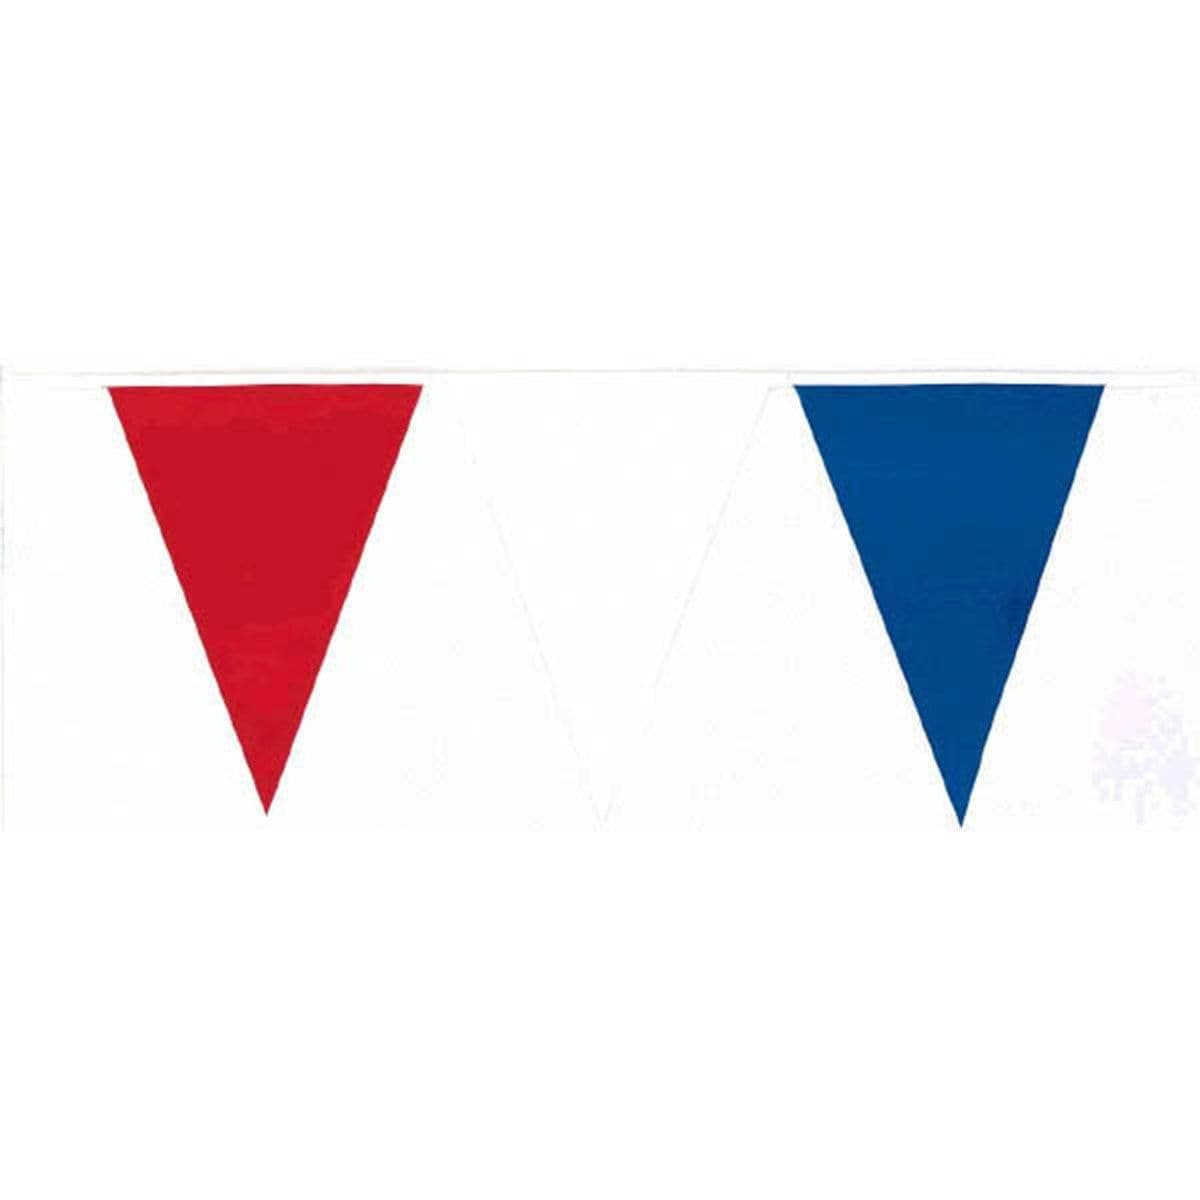 Buy Decorations Large Plastic Pennant Banner - Blue Red & White sold at Party Expert